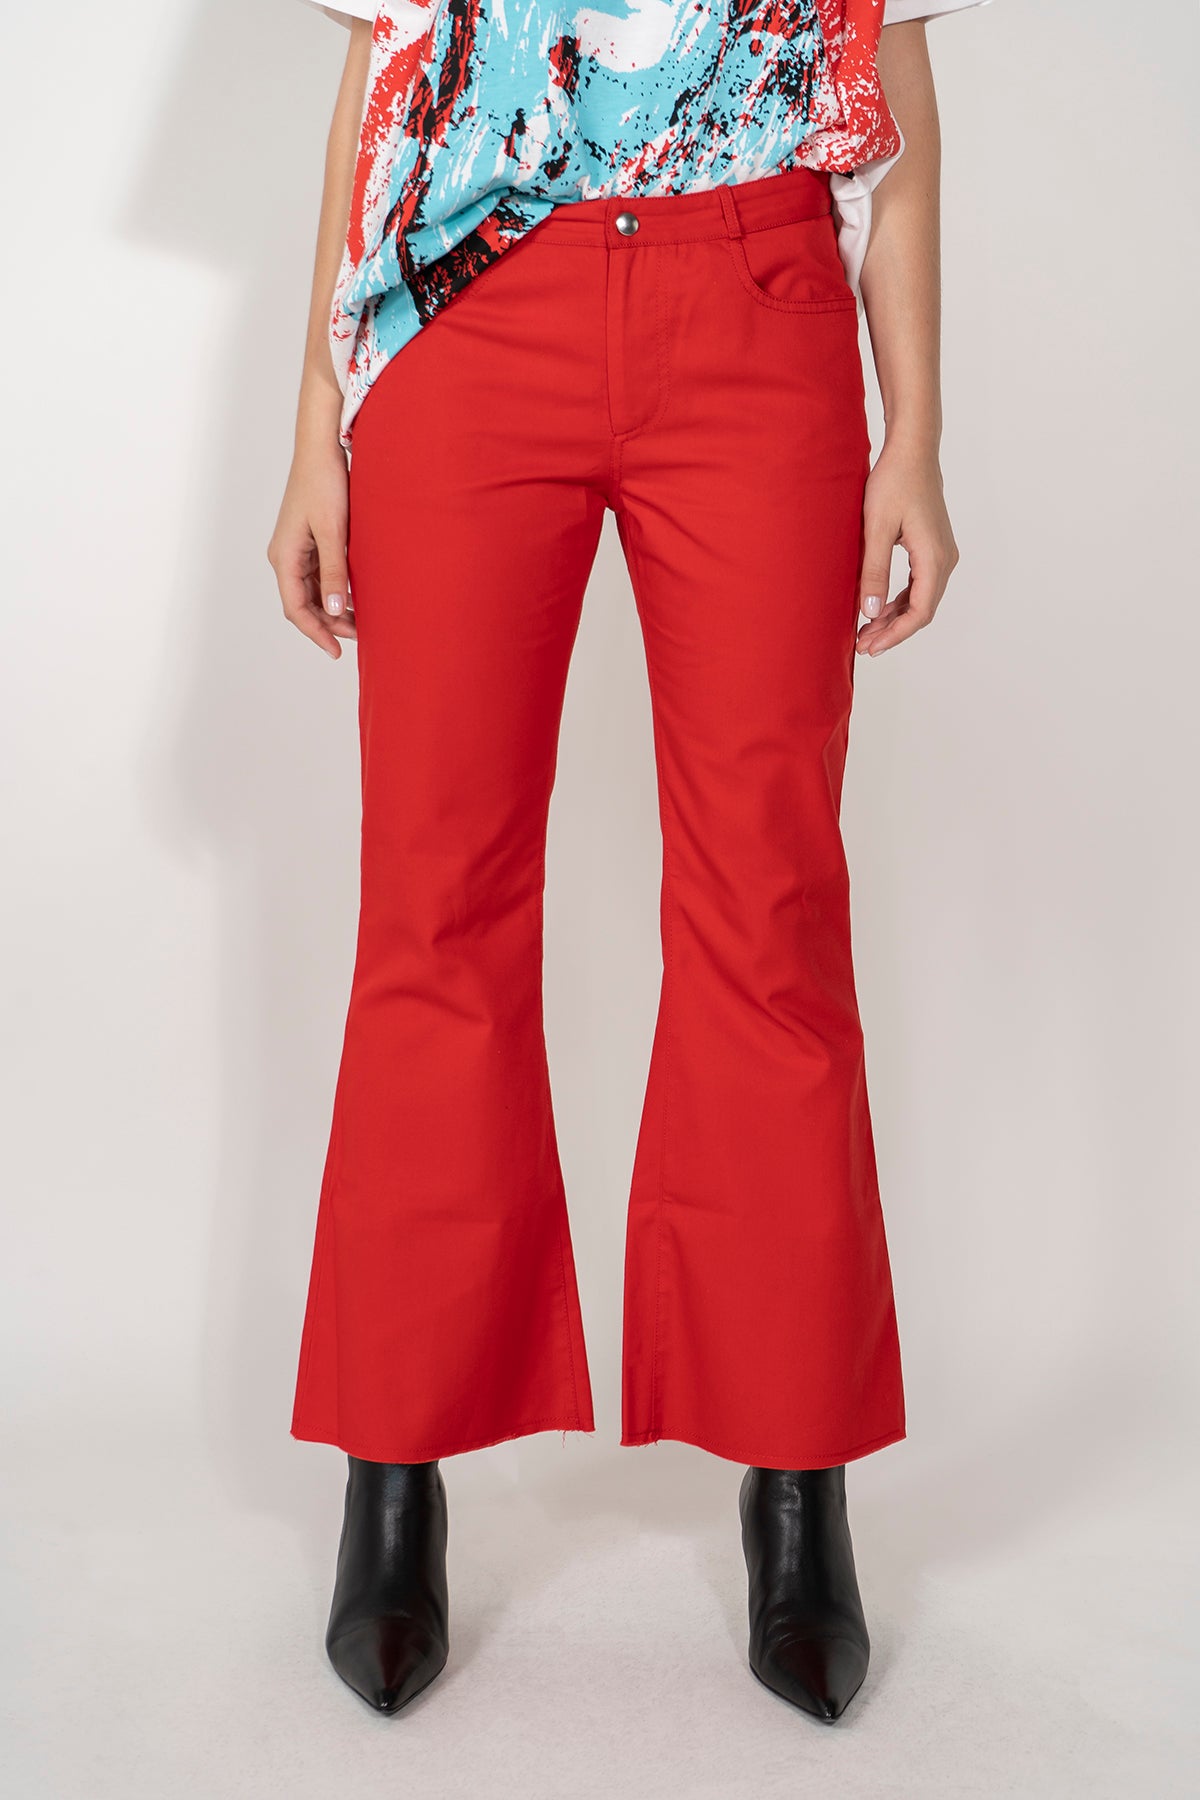 PRE-OWNED / RED CLASSIC FLARED CAPRIS MARQUES ALMEIDA